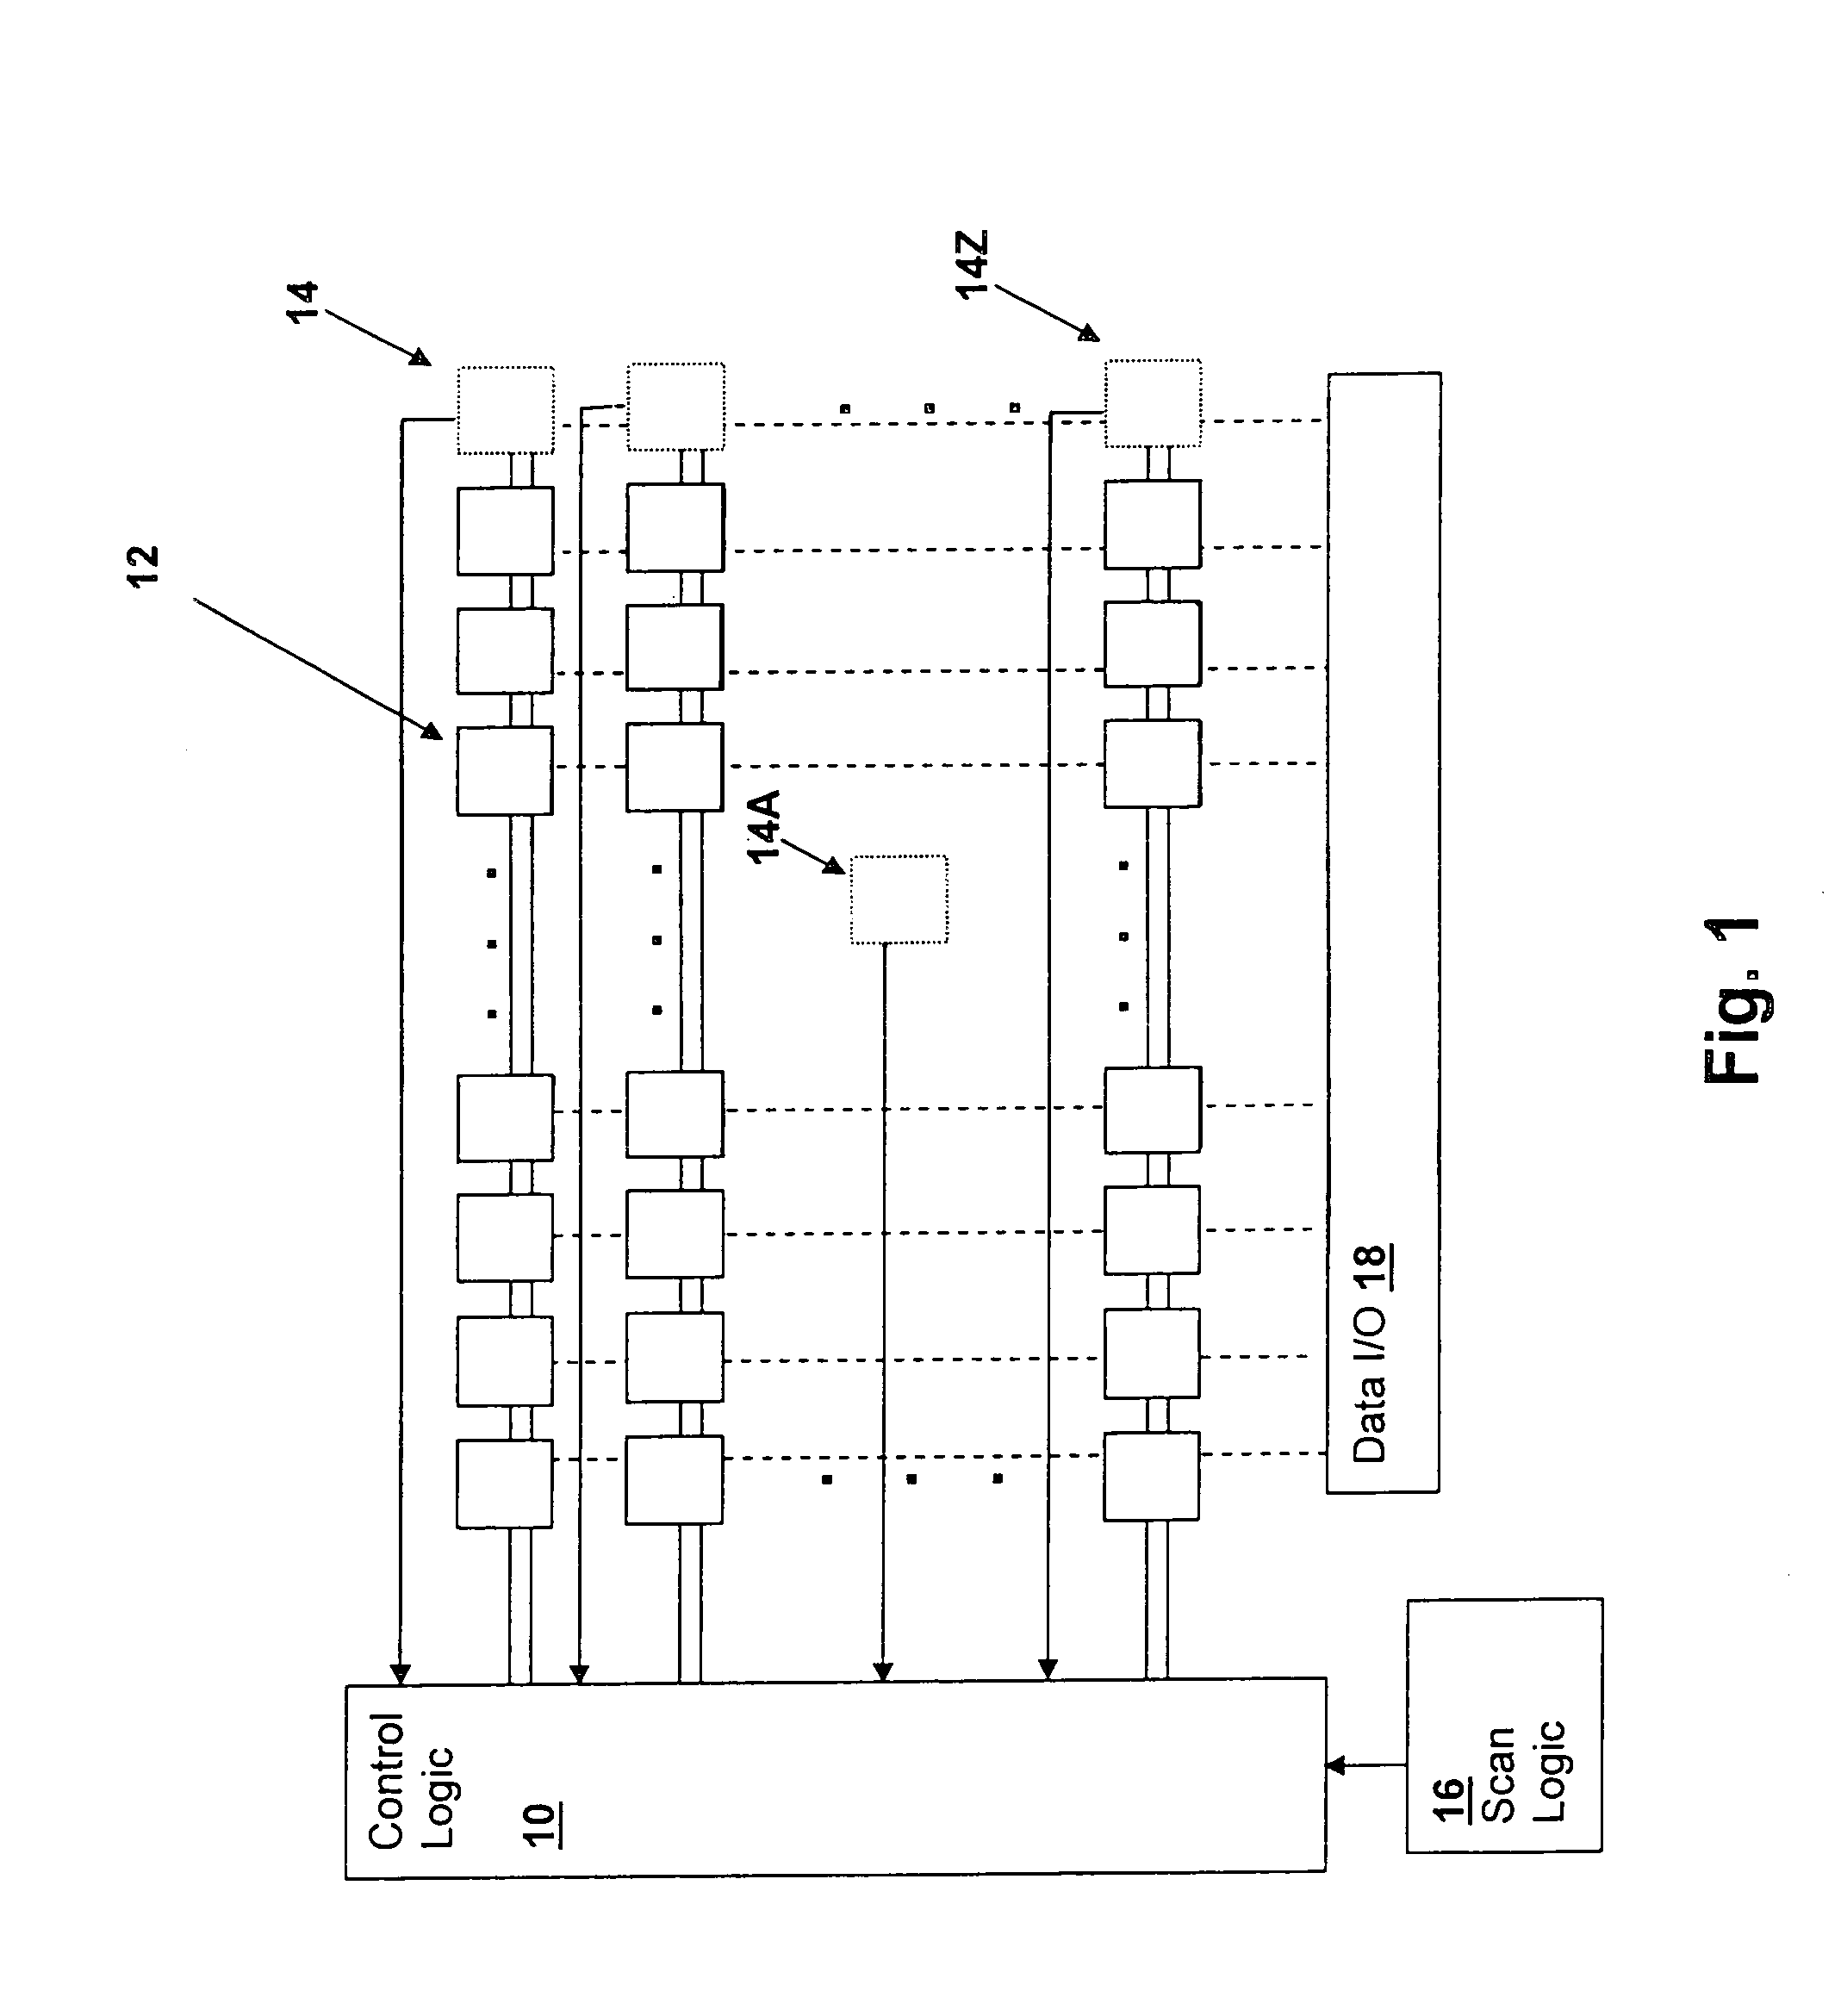 Register file apparatus and method incorporating read-after-write blocking using detection cells